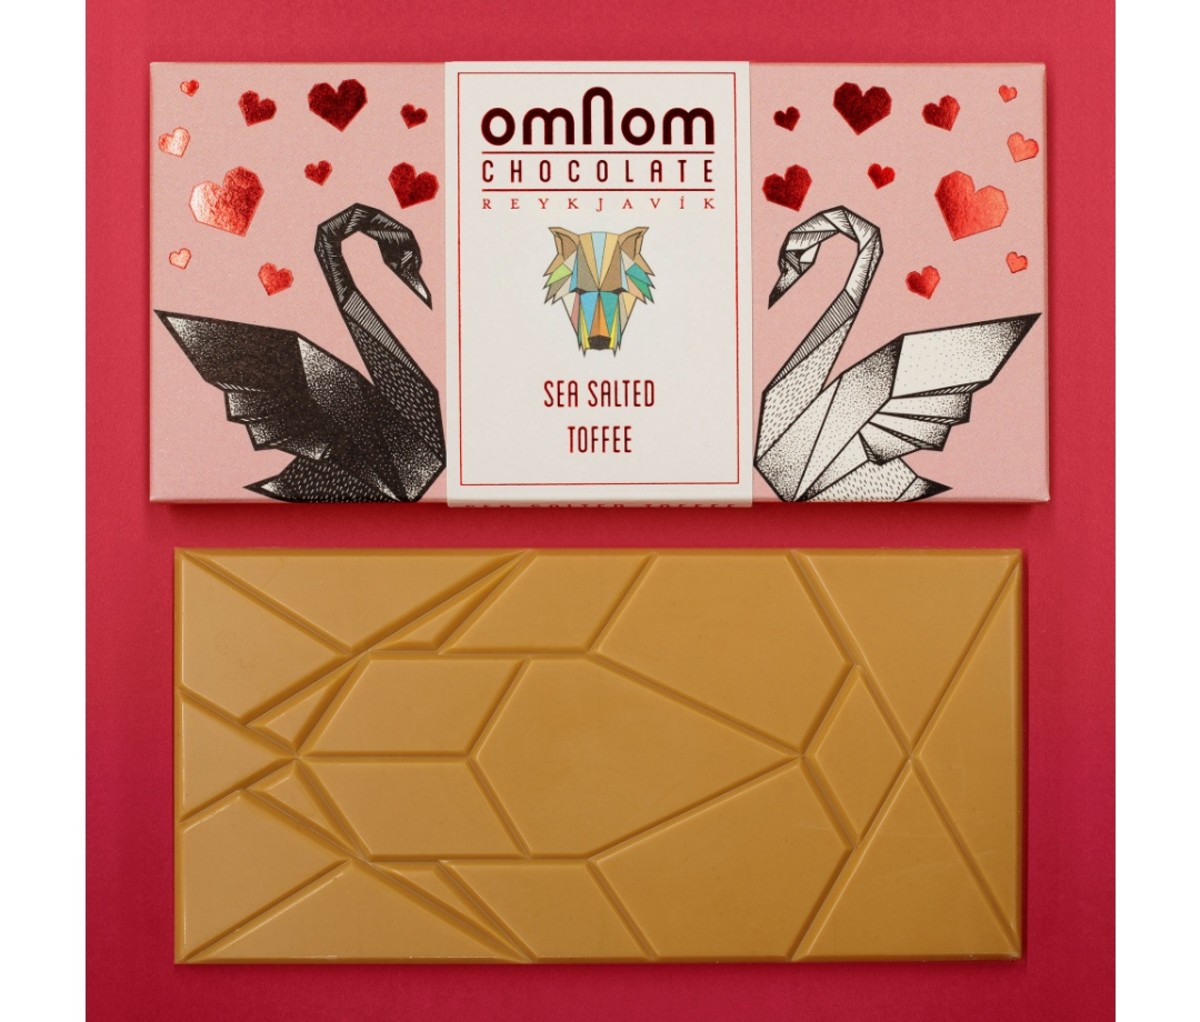 Omnom Chocolates wrapped and unwrapped against a red background. Mother's Day gifts